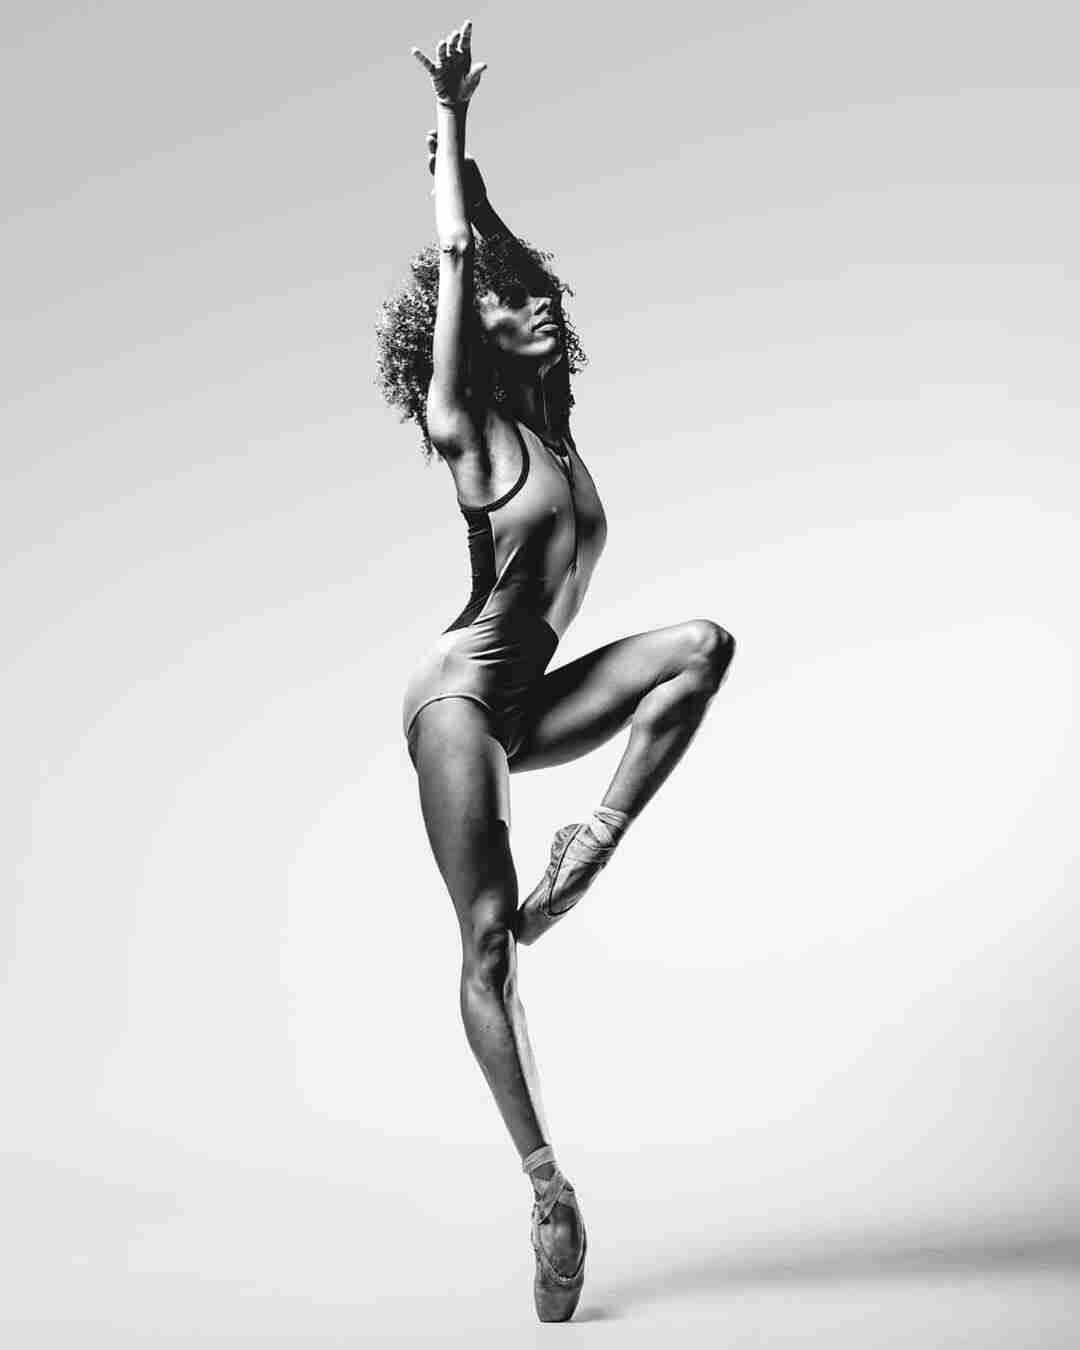 Chloé Lopes Gomes performs ballet.